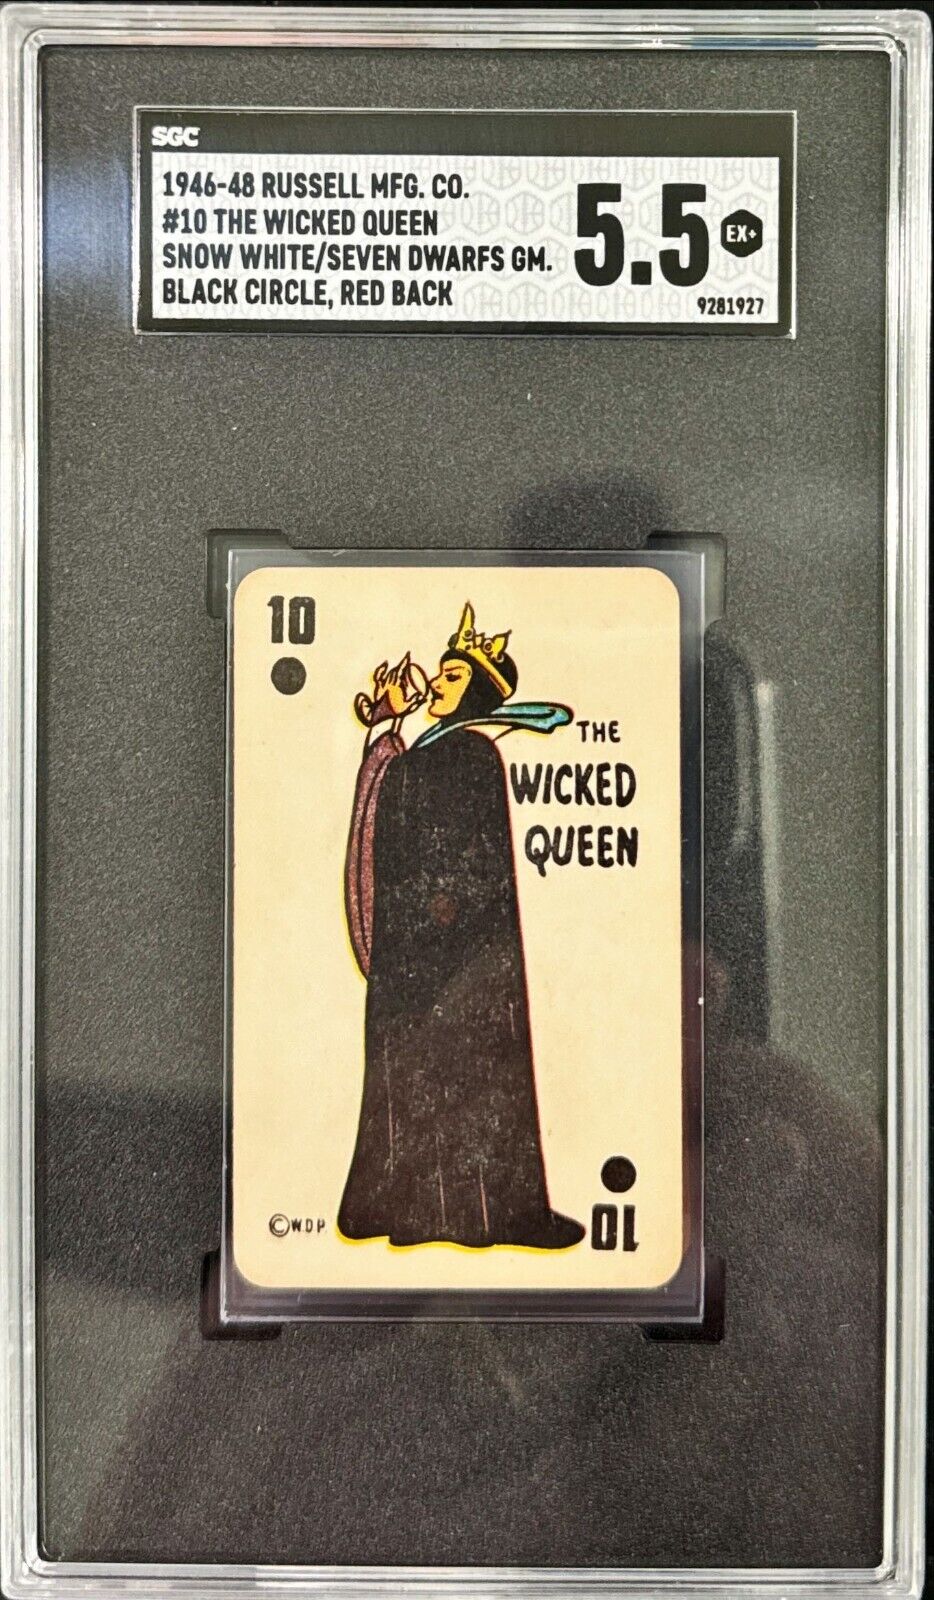 1946-48 RUSSELL MFG CO. #10 THE WICKED QUEEN  SGC  5.5. *850